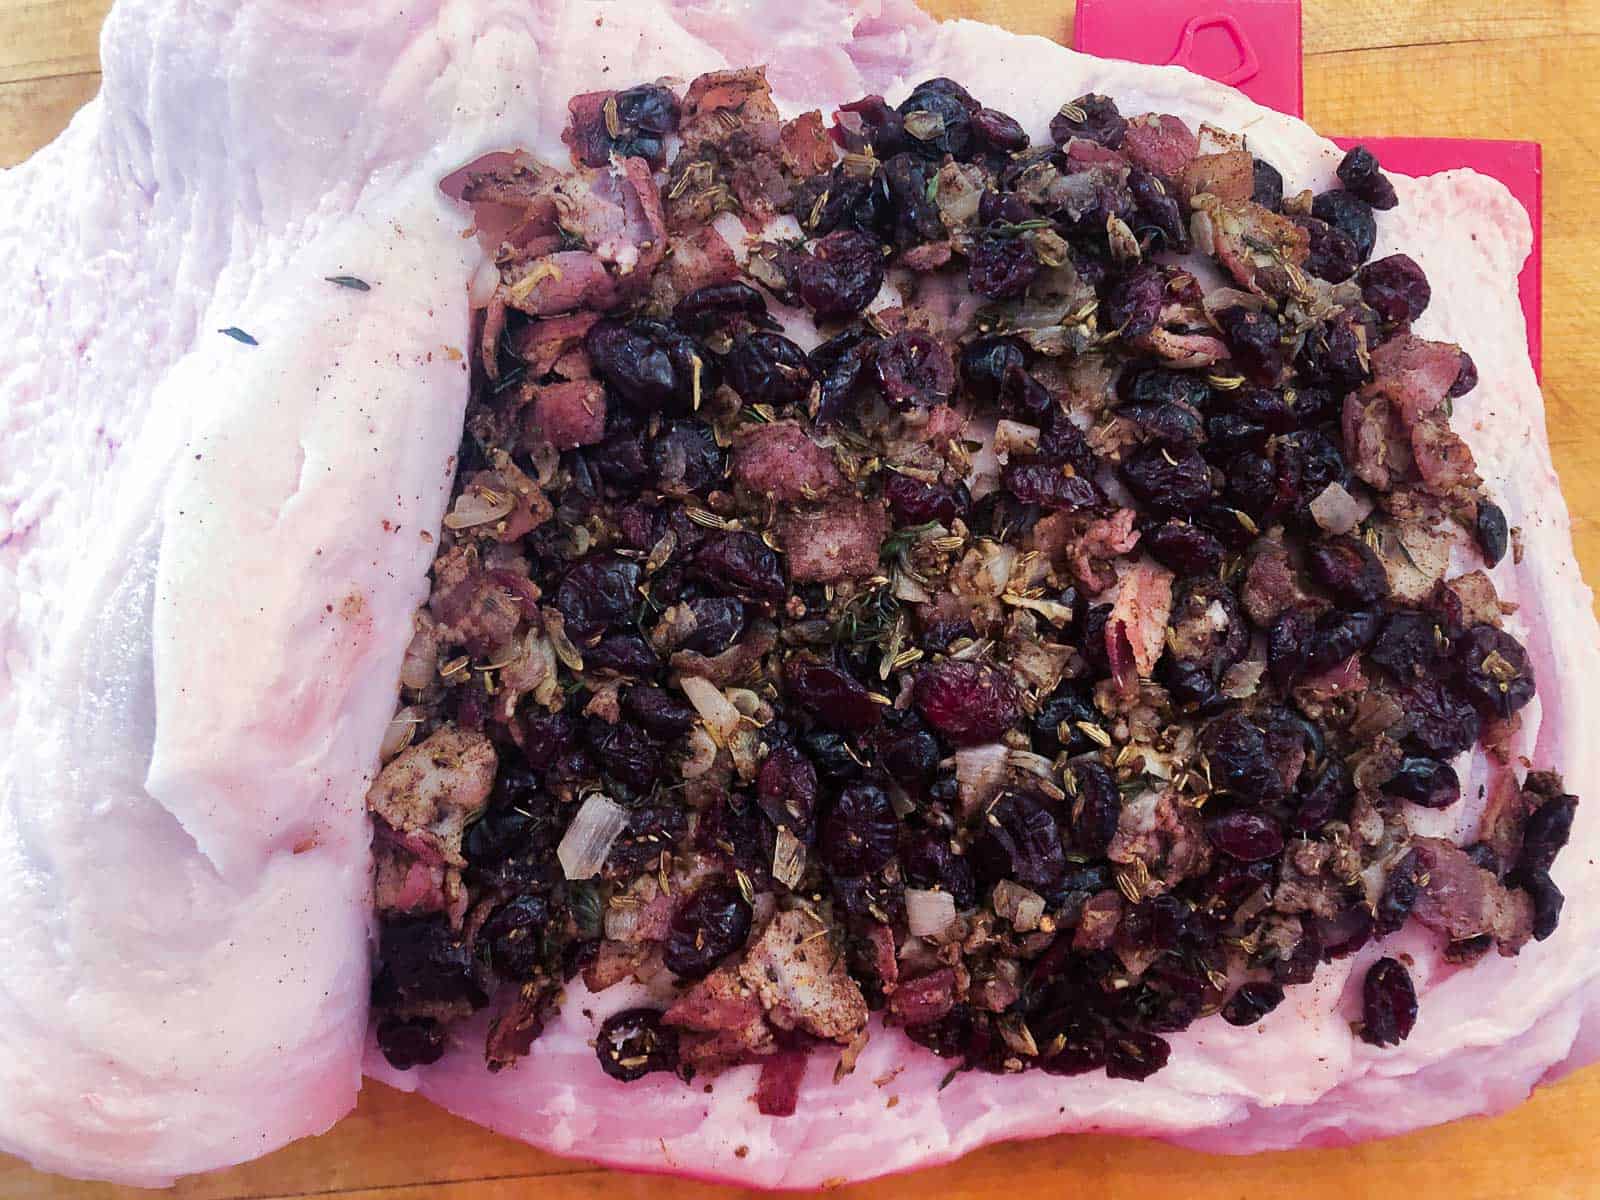 Adding a cranberries spiced stuffing to a pork roast before tying it for cooking.